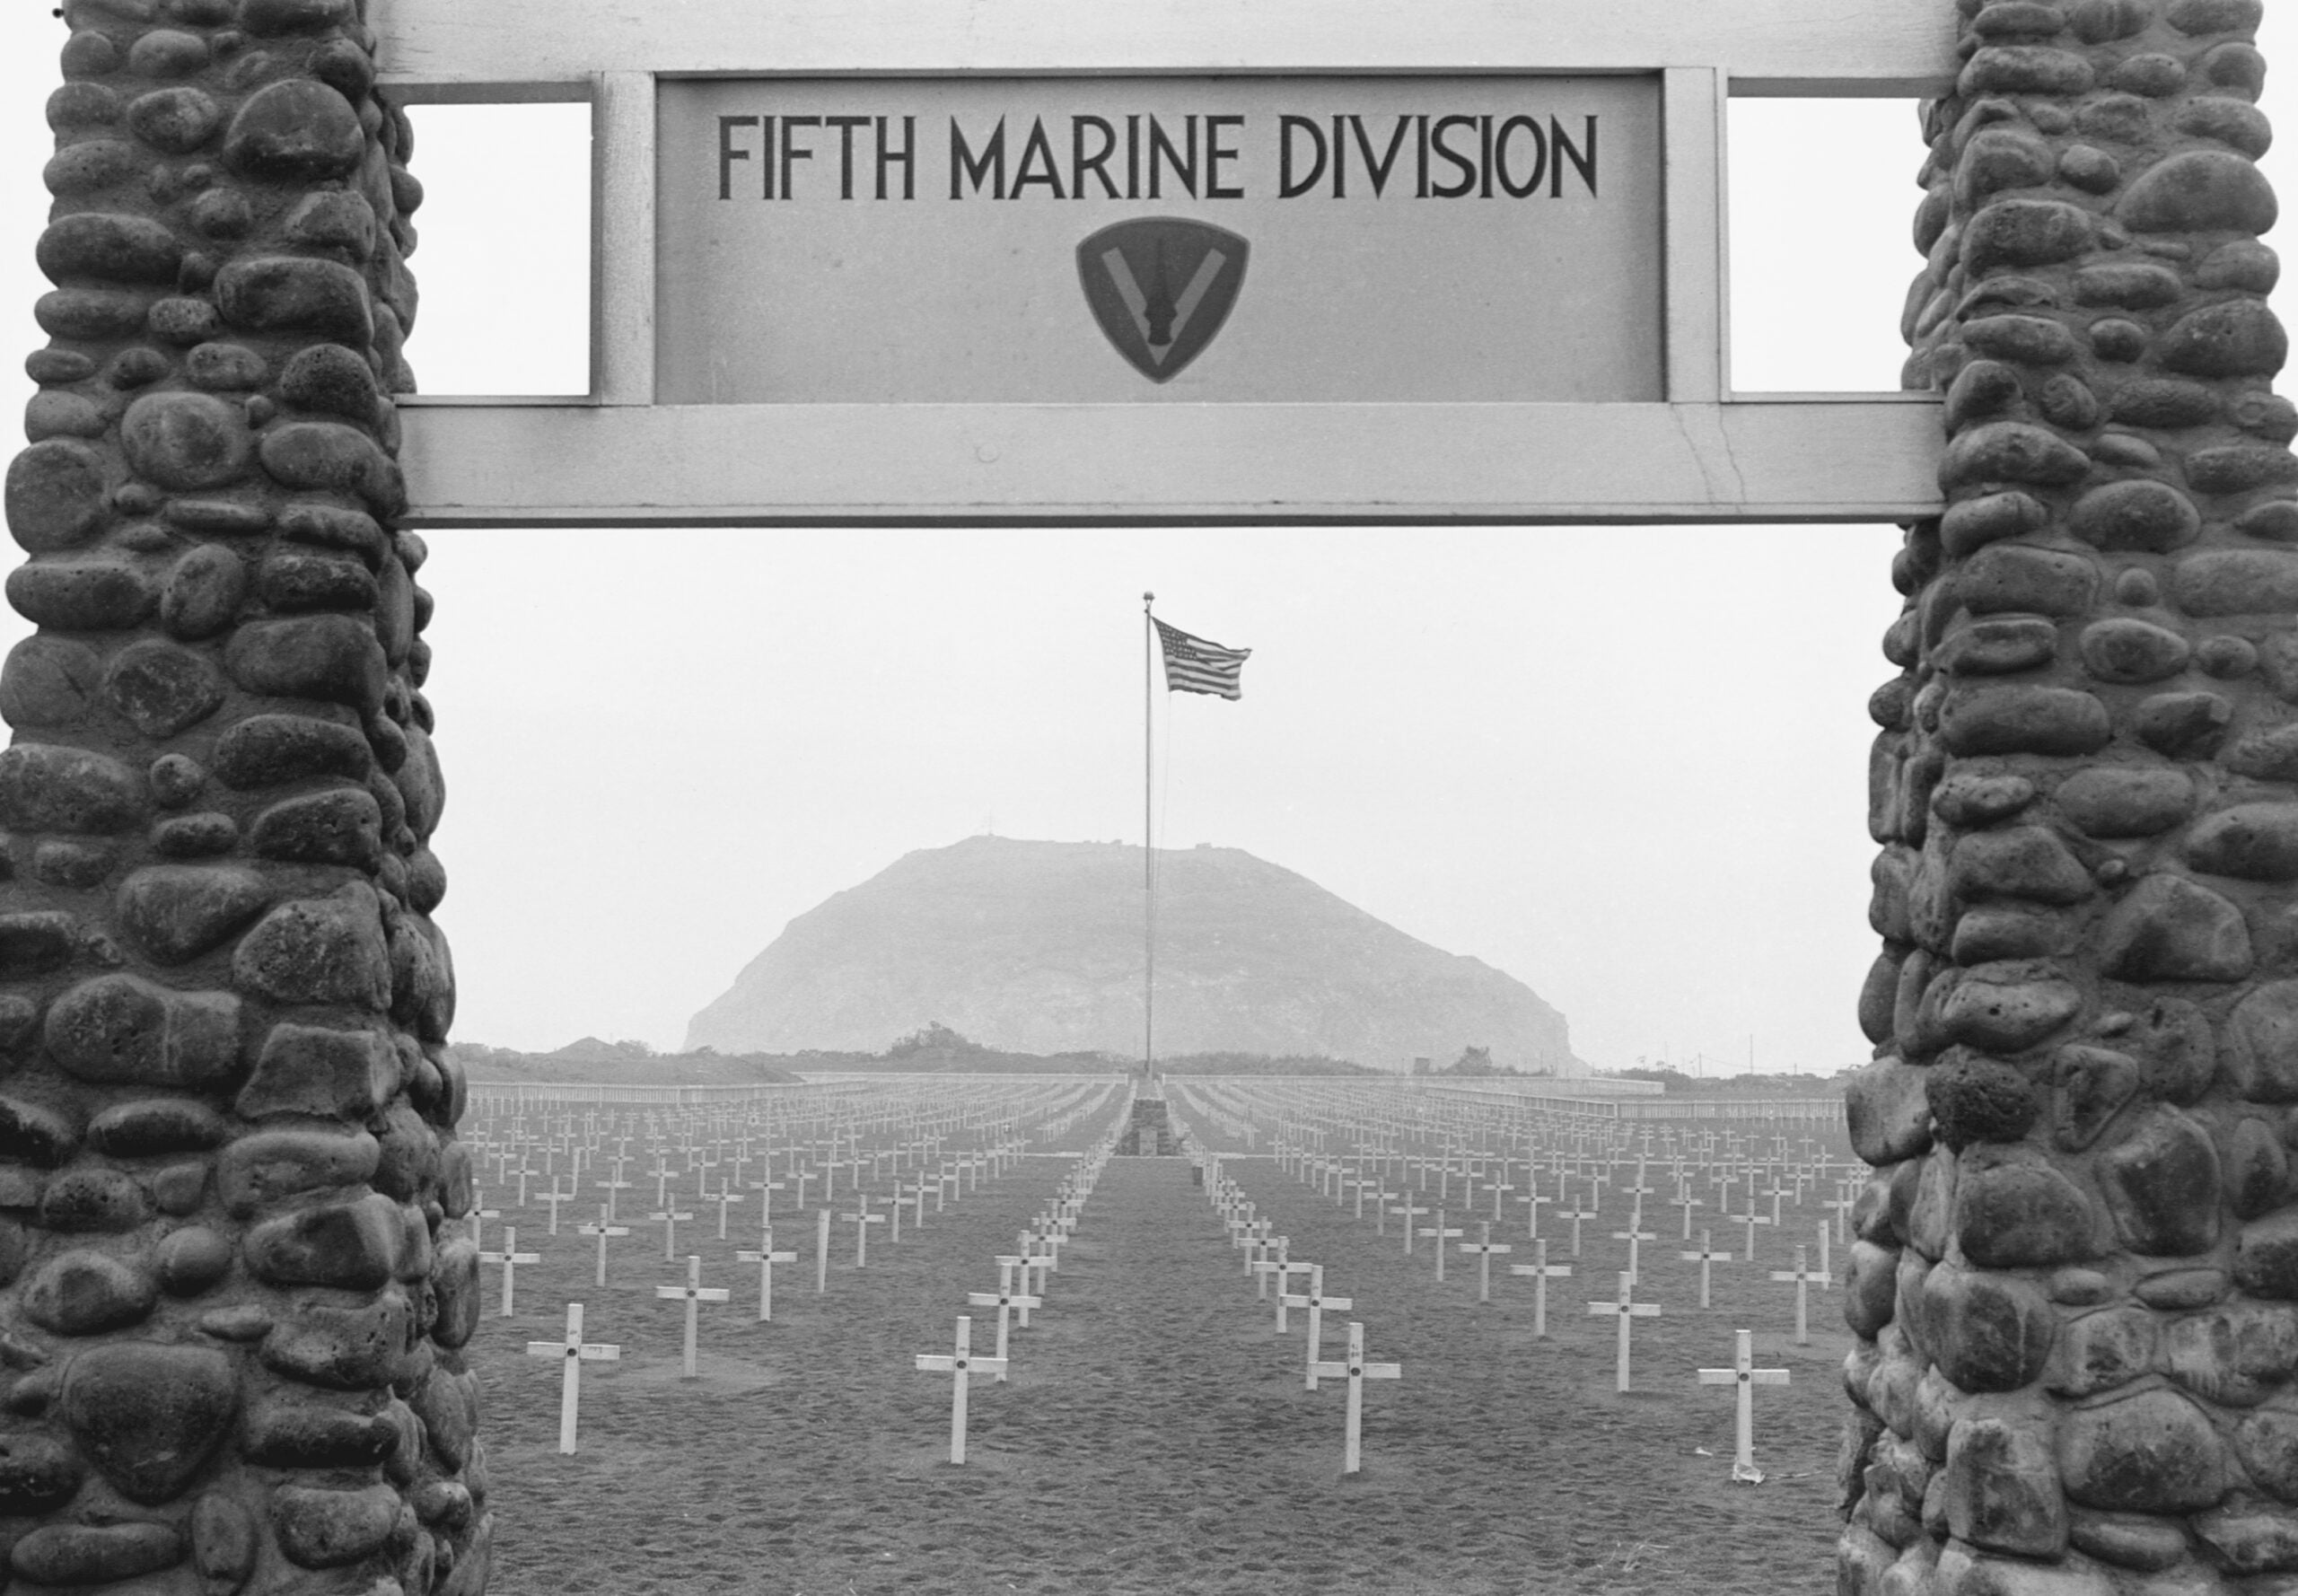 A Marine who filmed the iconic Iwo Jima flag raising was killed on the island days later. His remains are still there